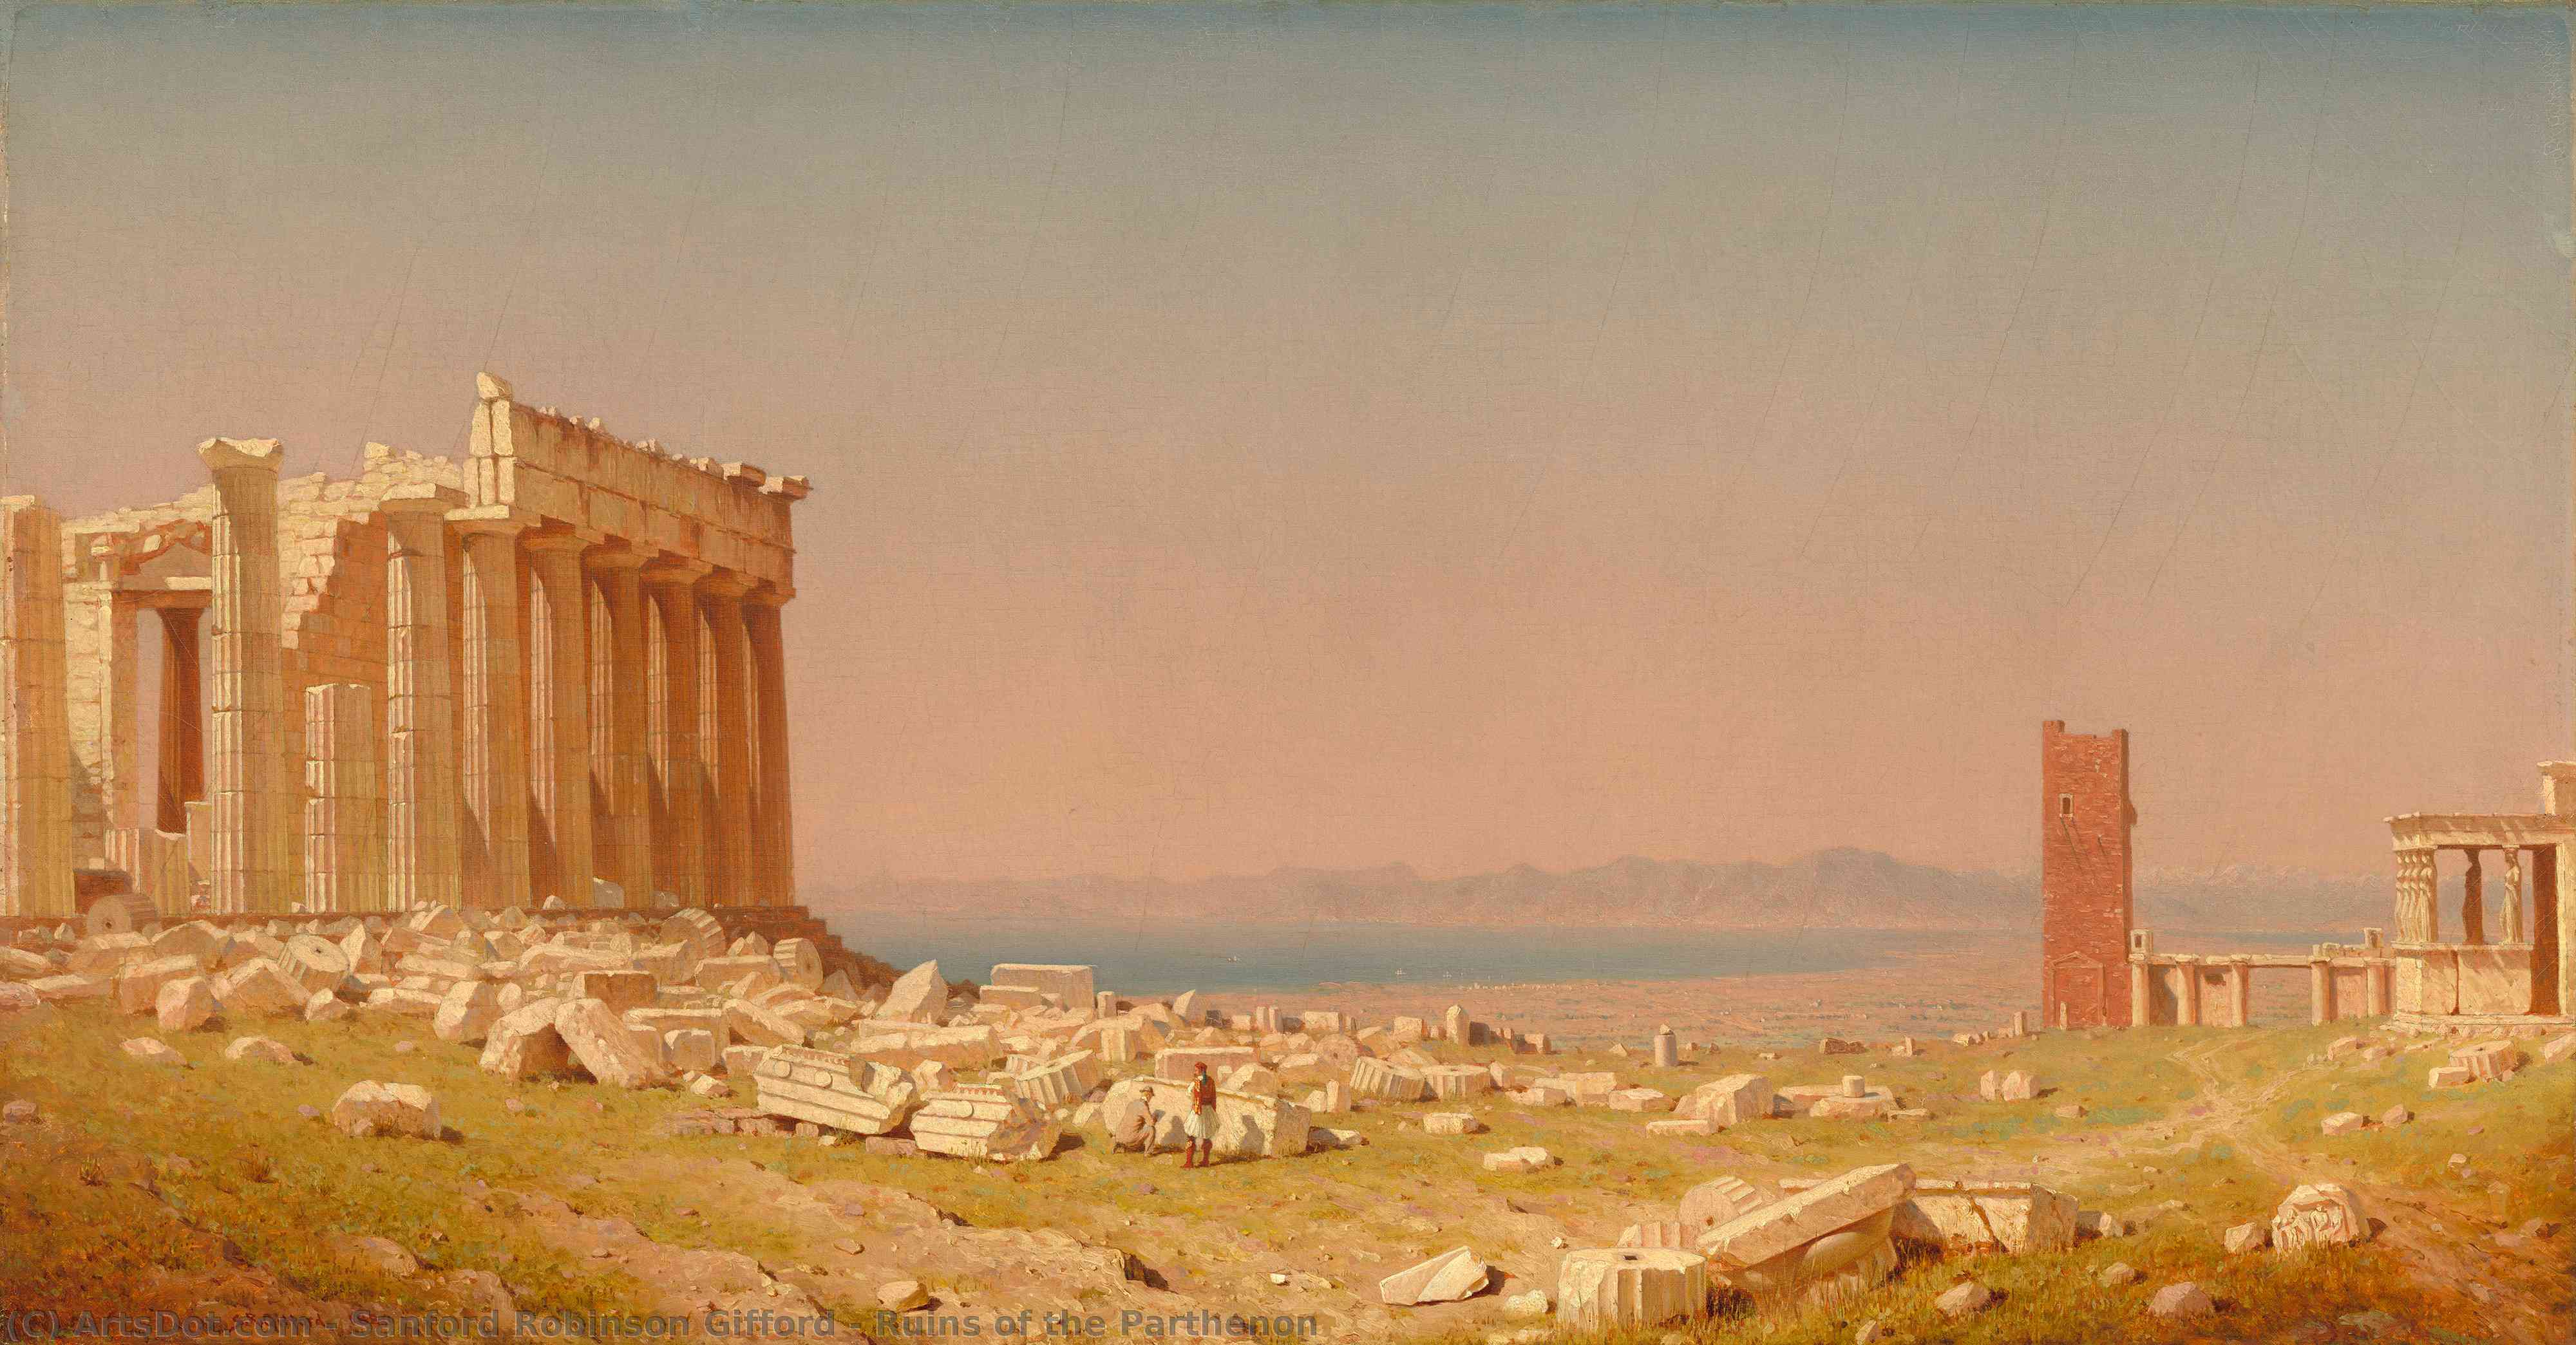 Order Oil Painting Replica Ruins of the Parthenon, 1880 by Sanford Robinson Gifford (1823-1880, United States) | ArtsDot.com